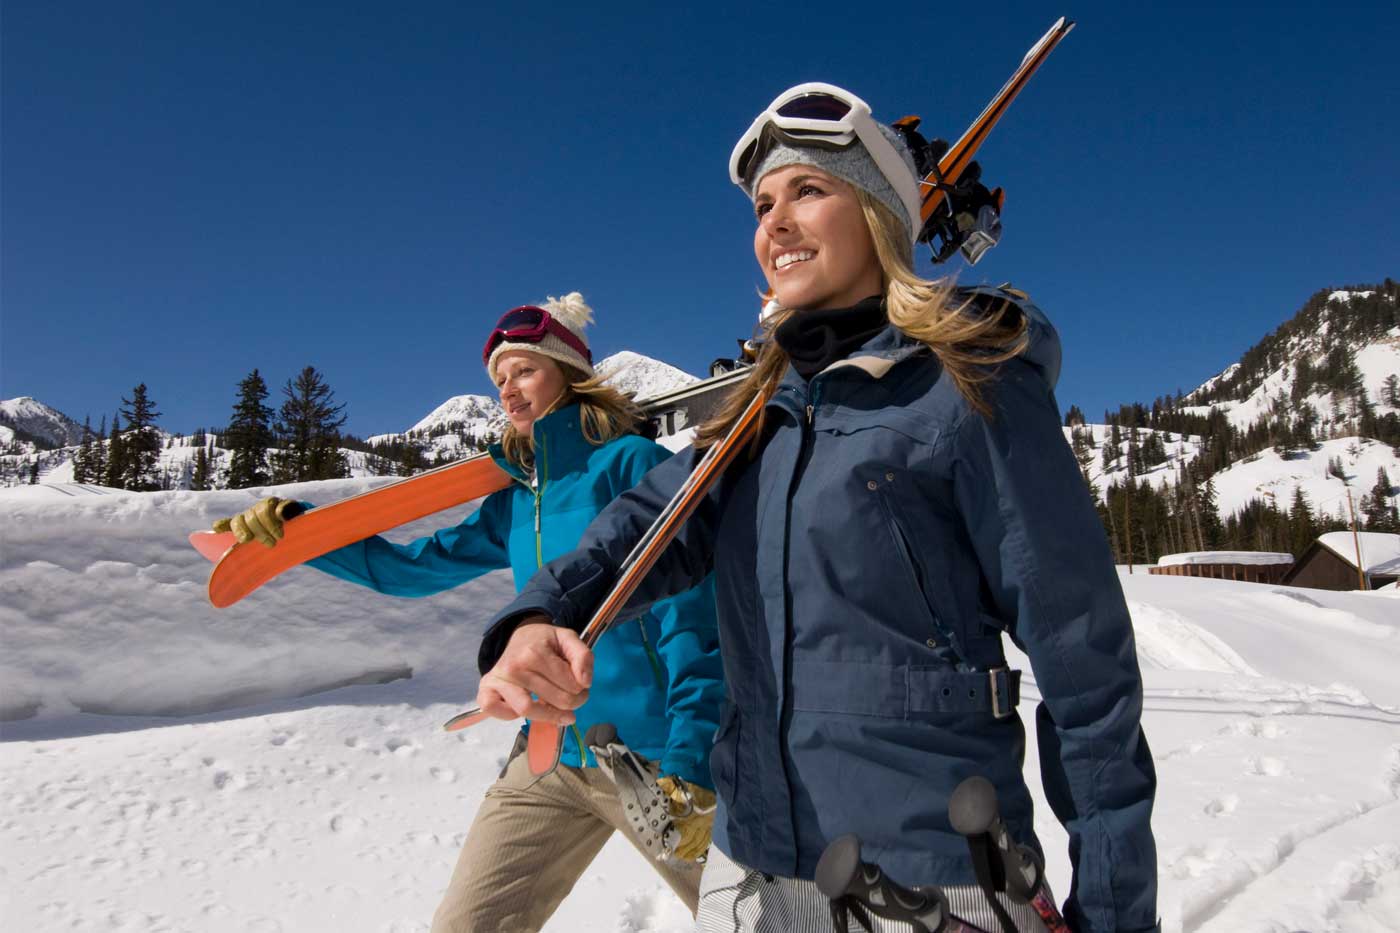 6 Skin Care Tips You Should Know Before You Go Skiing